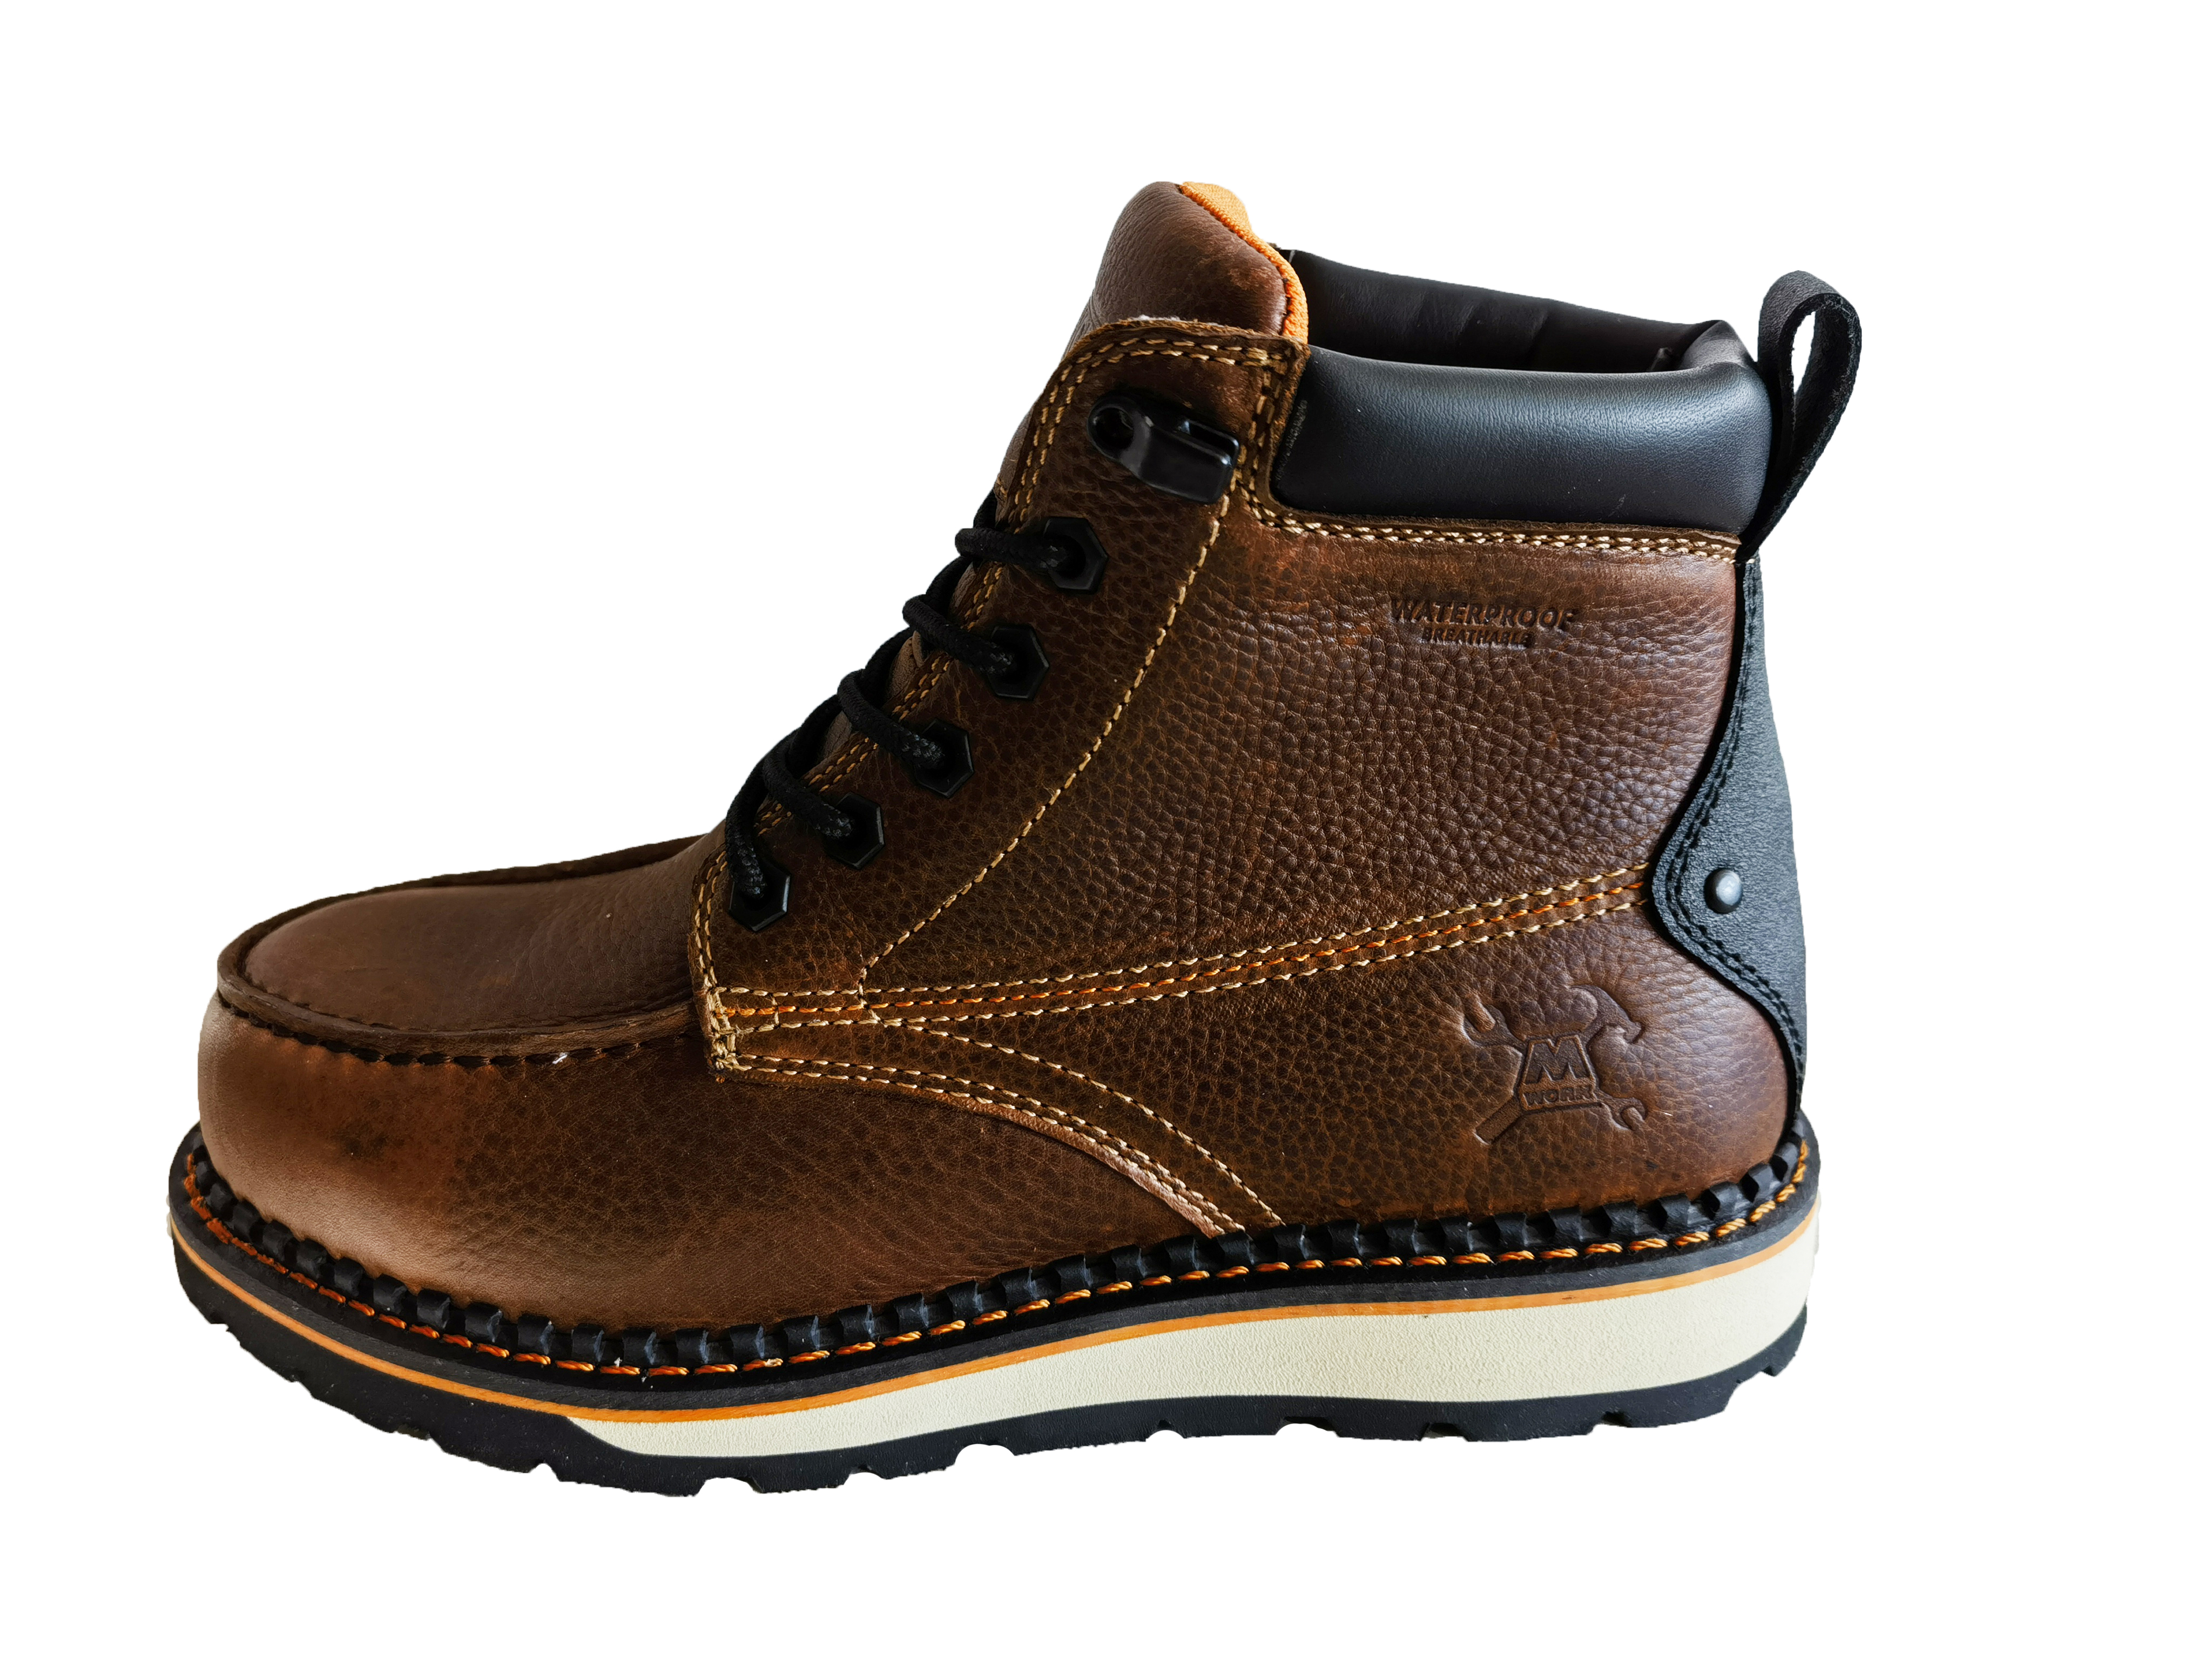 Durable and Protective Leather Safety Footwear for Work